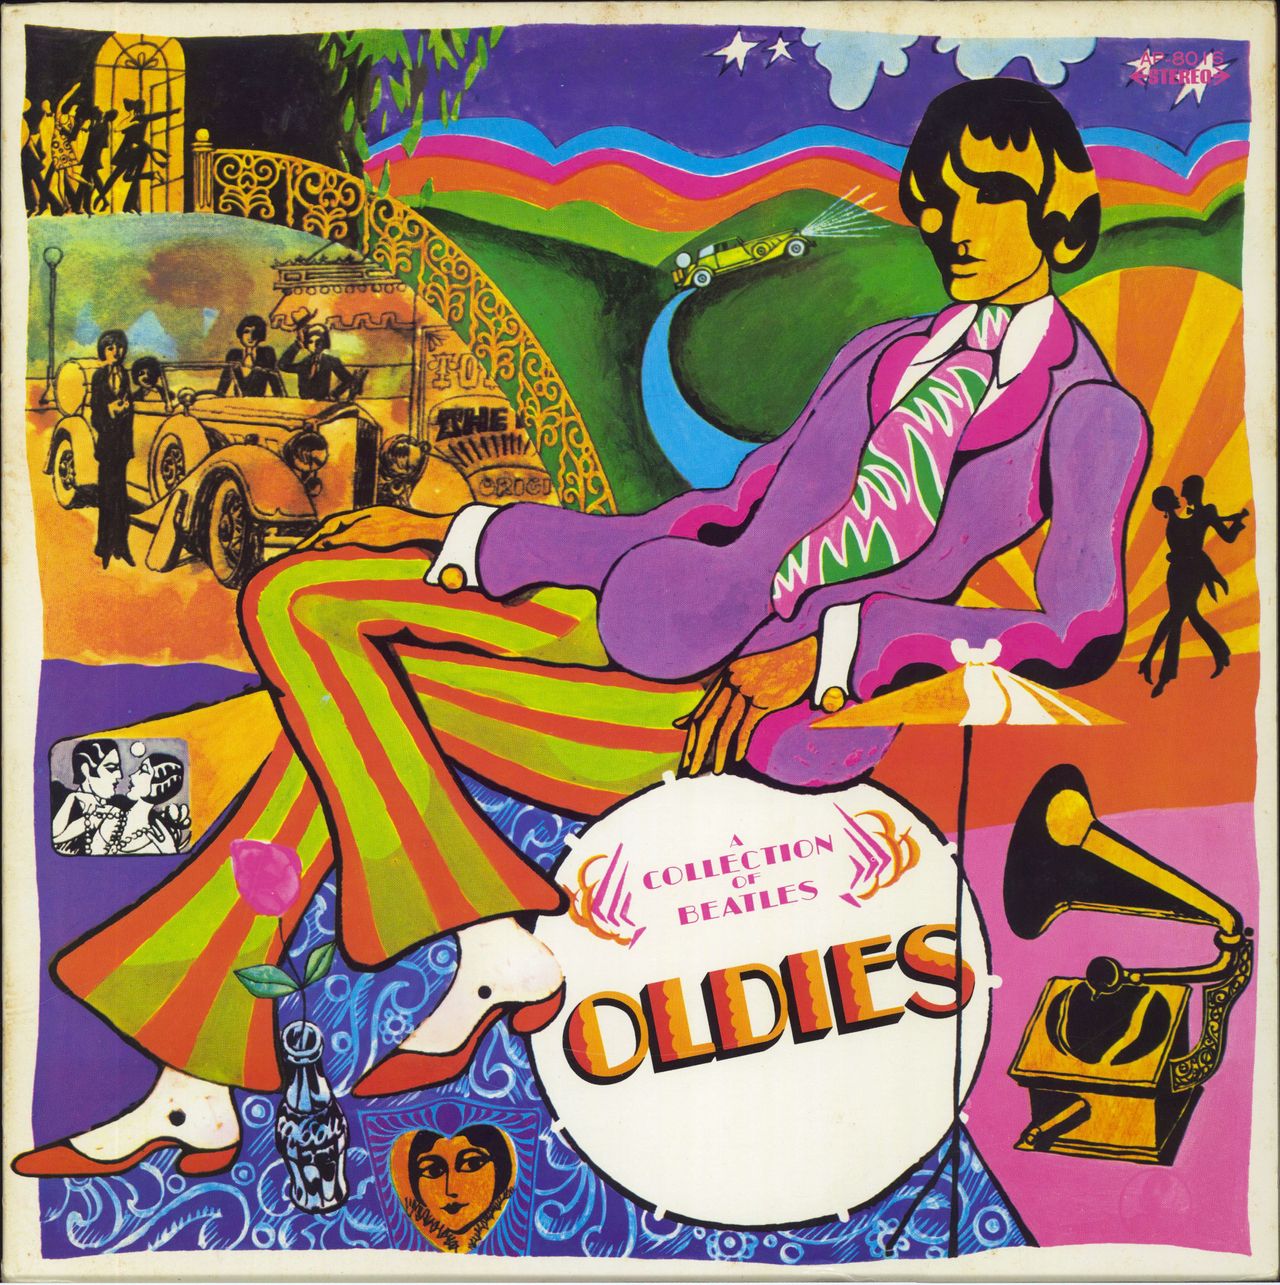 The Beatles A Collection Of Beatles Oldies Japanese Vinyl LP